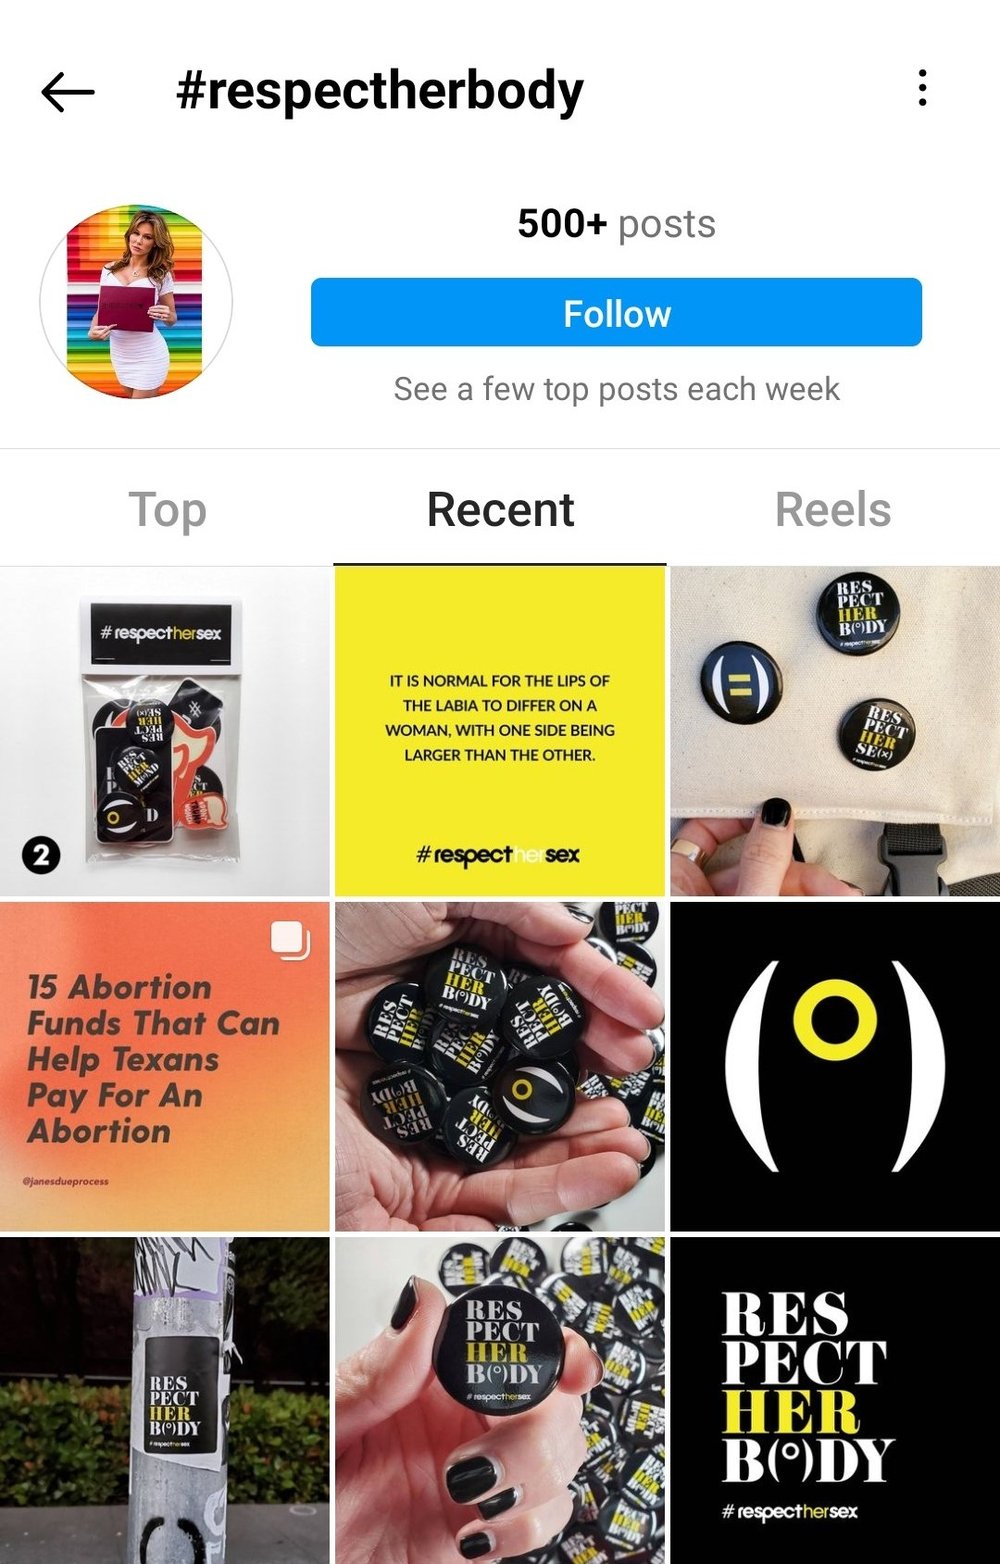  Instagram search results under the hashtag #RespectHerBody. The Recent Posts results do not display the latest post for The Femme Project displaying body images and discussing real bodies. 